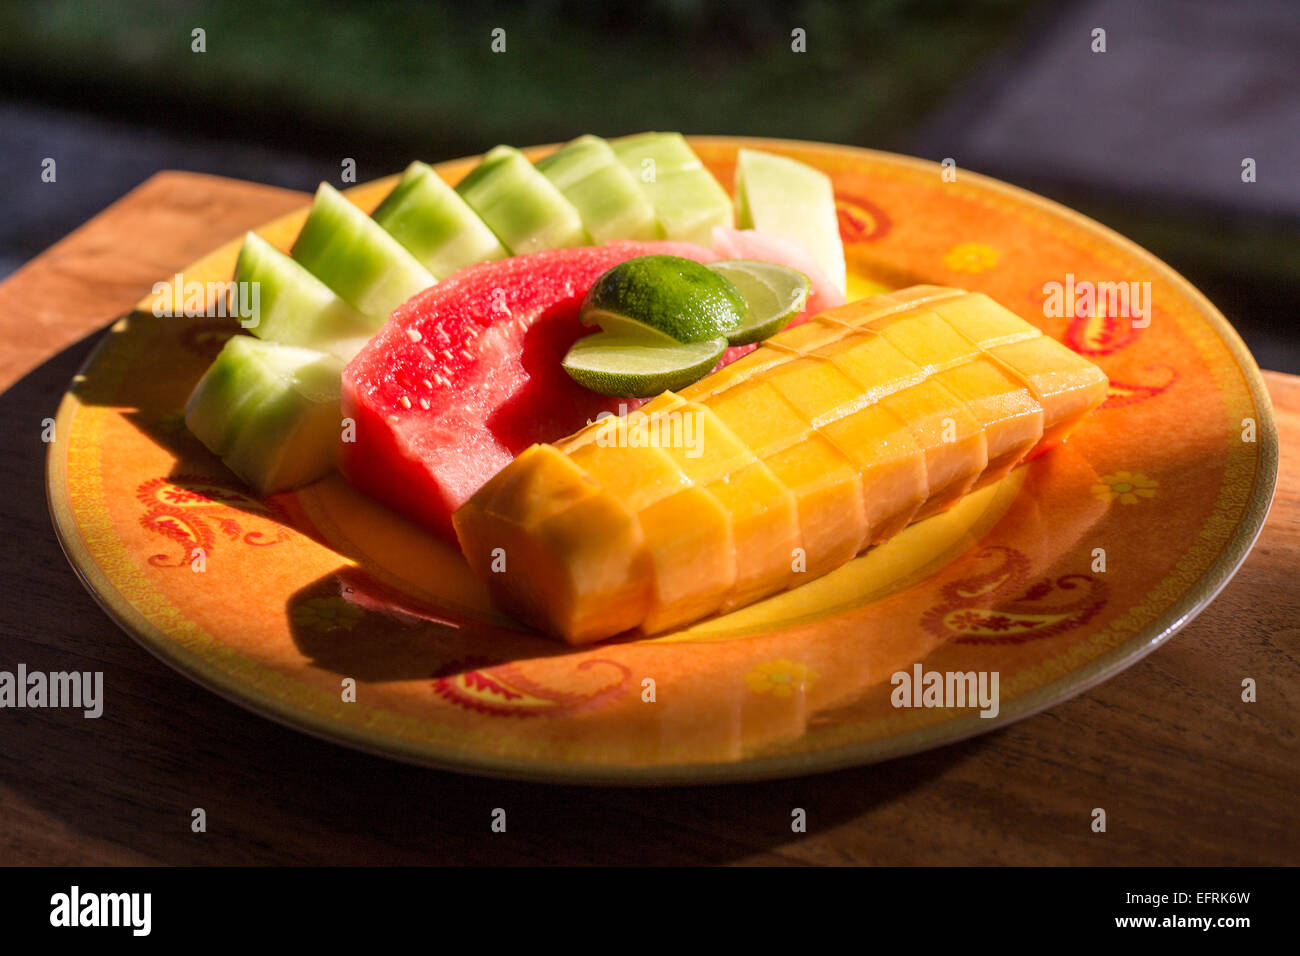 Assorted fruits on a plate Stock Photo